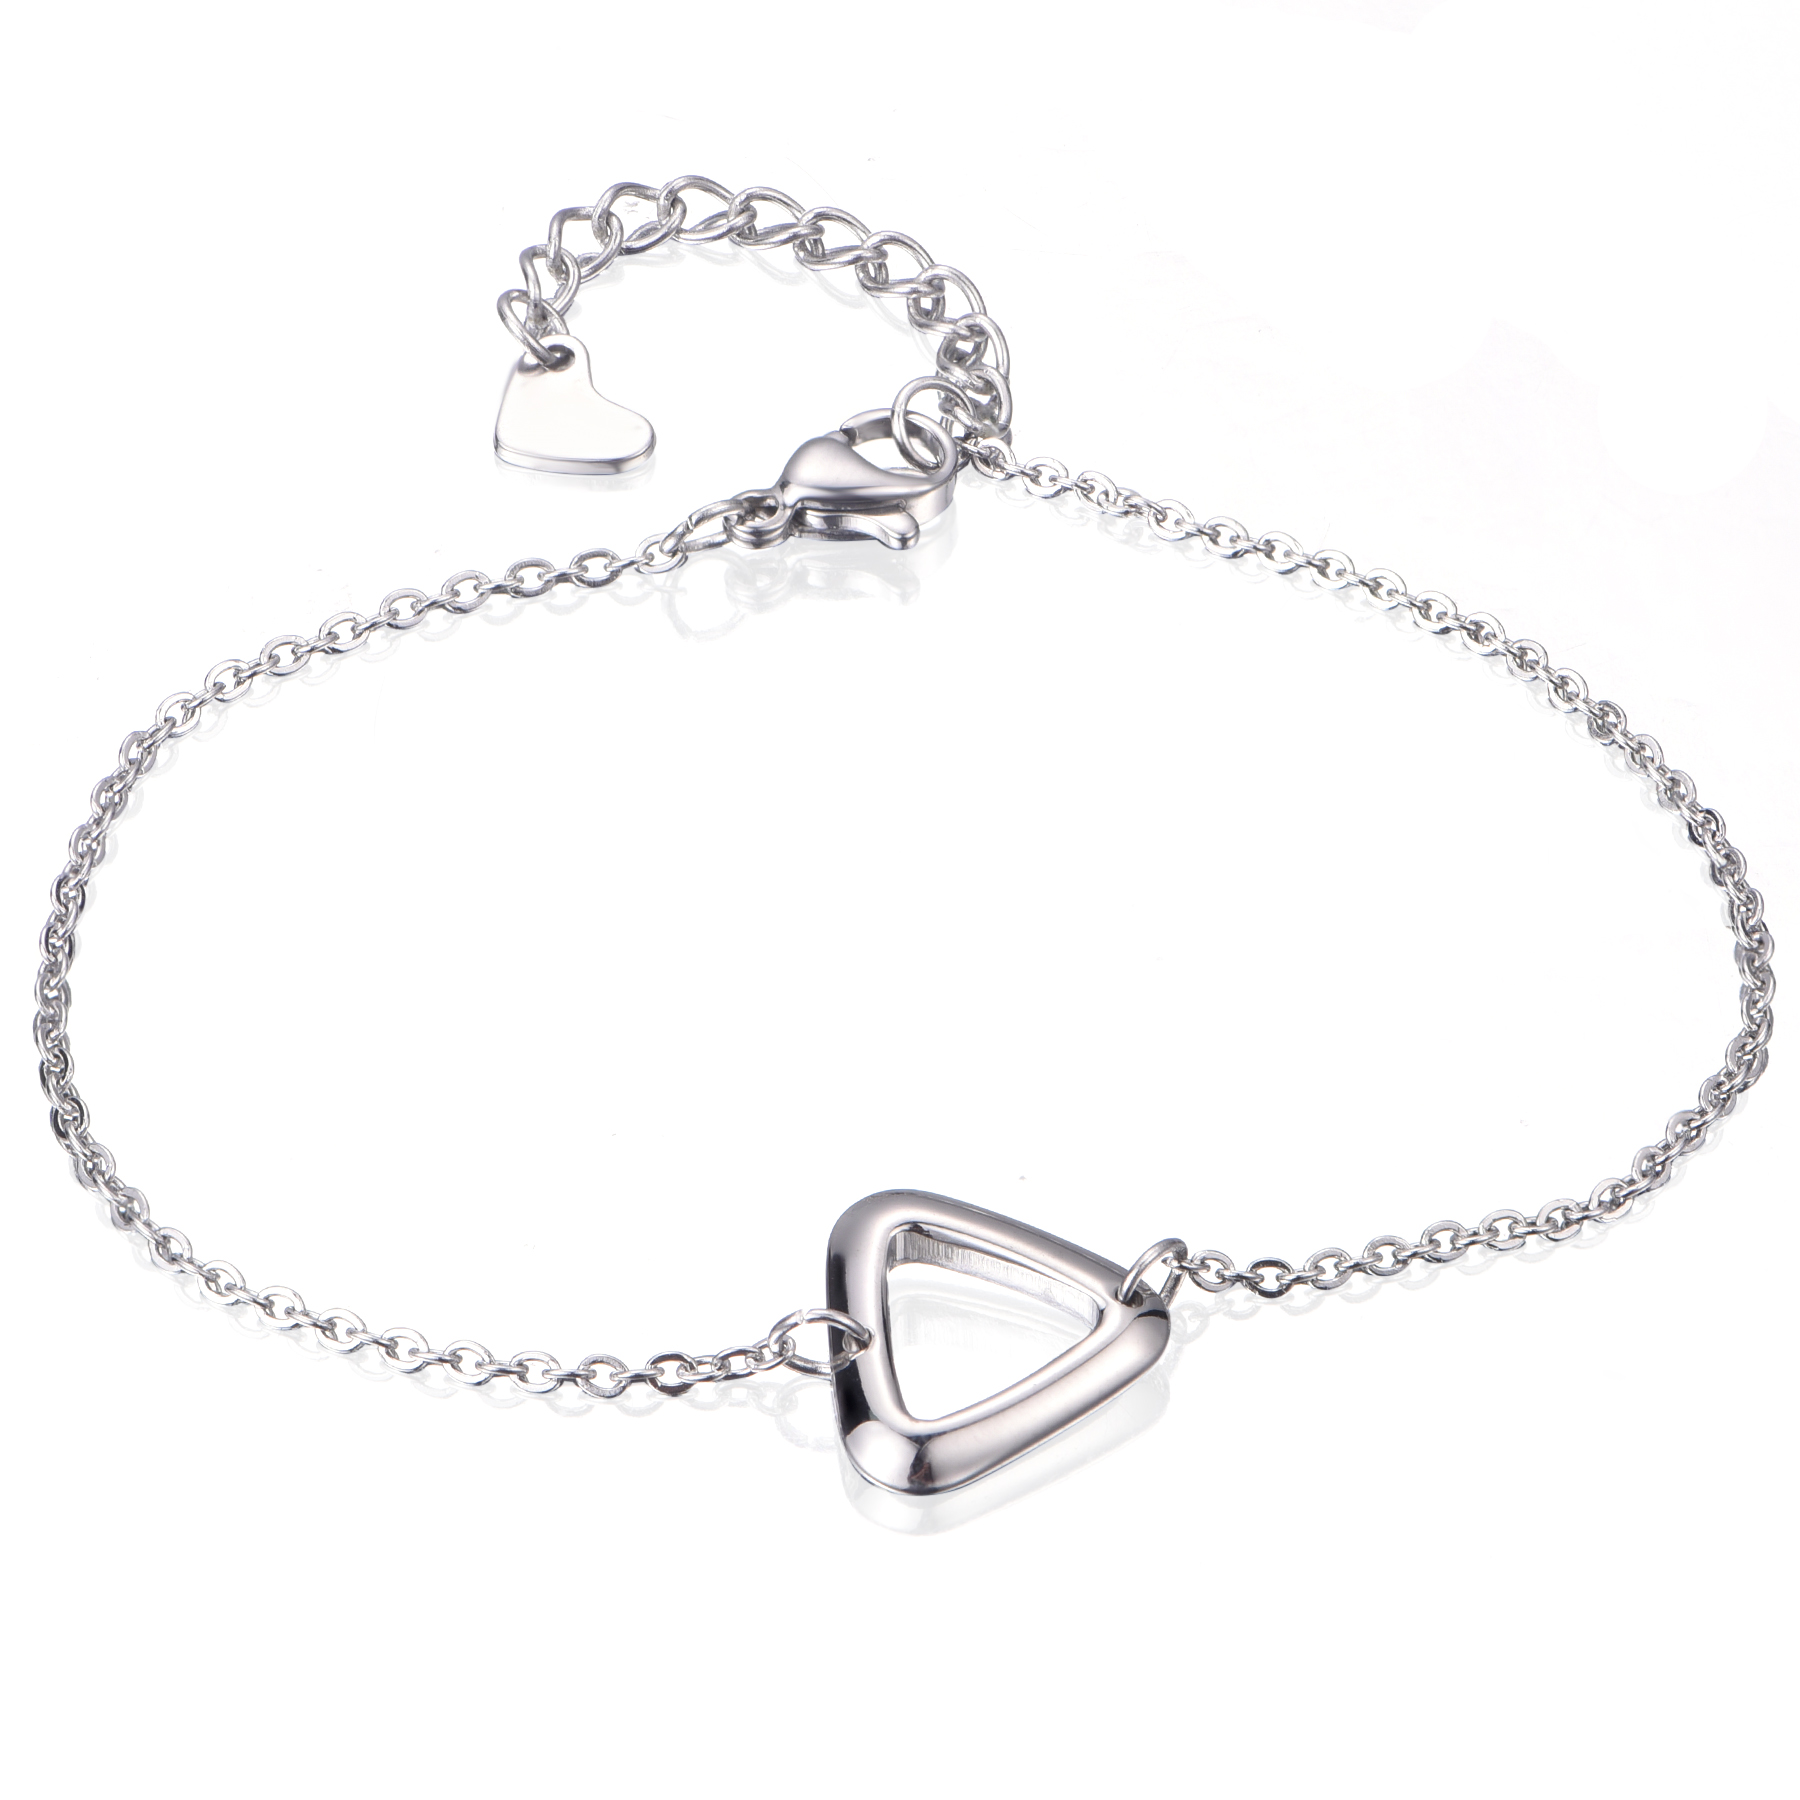 Silver Plated Stainless Steel Shiny Triangle Geometric Chain Bracelet BL7-20